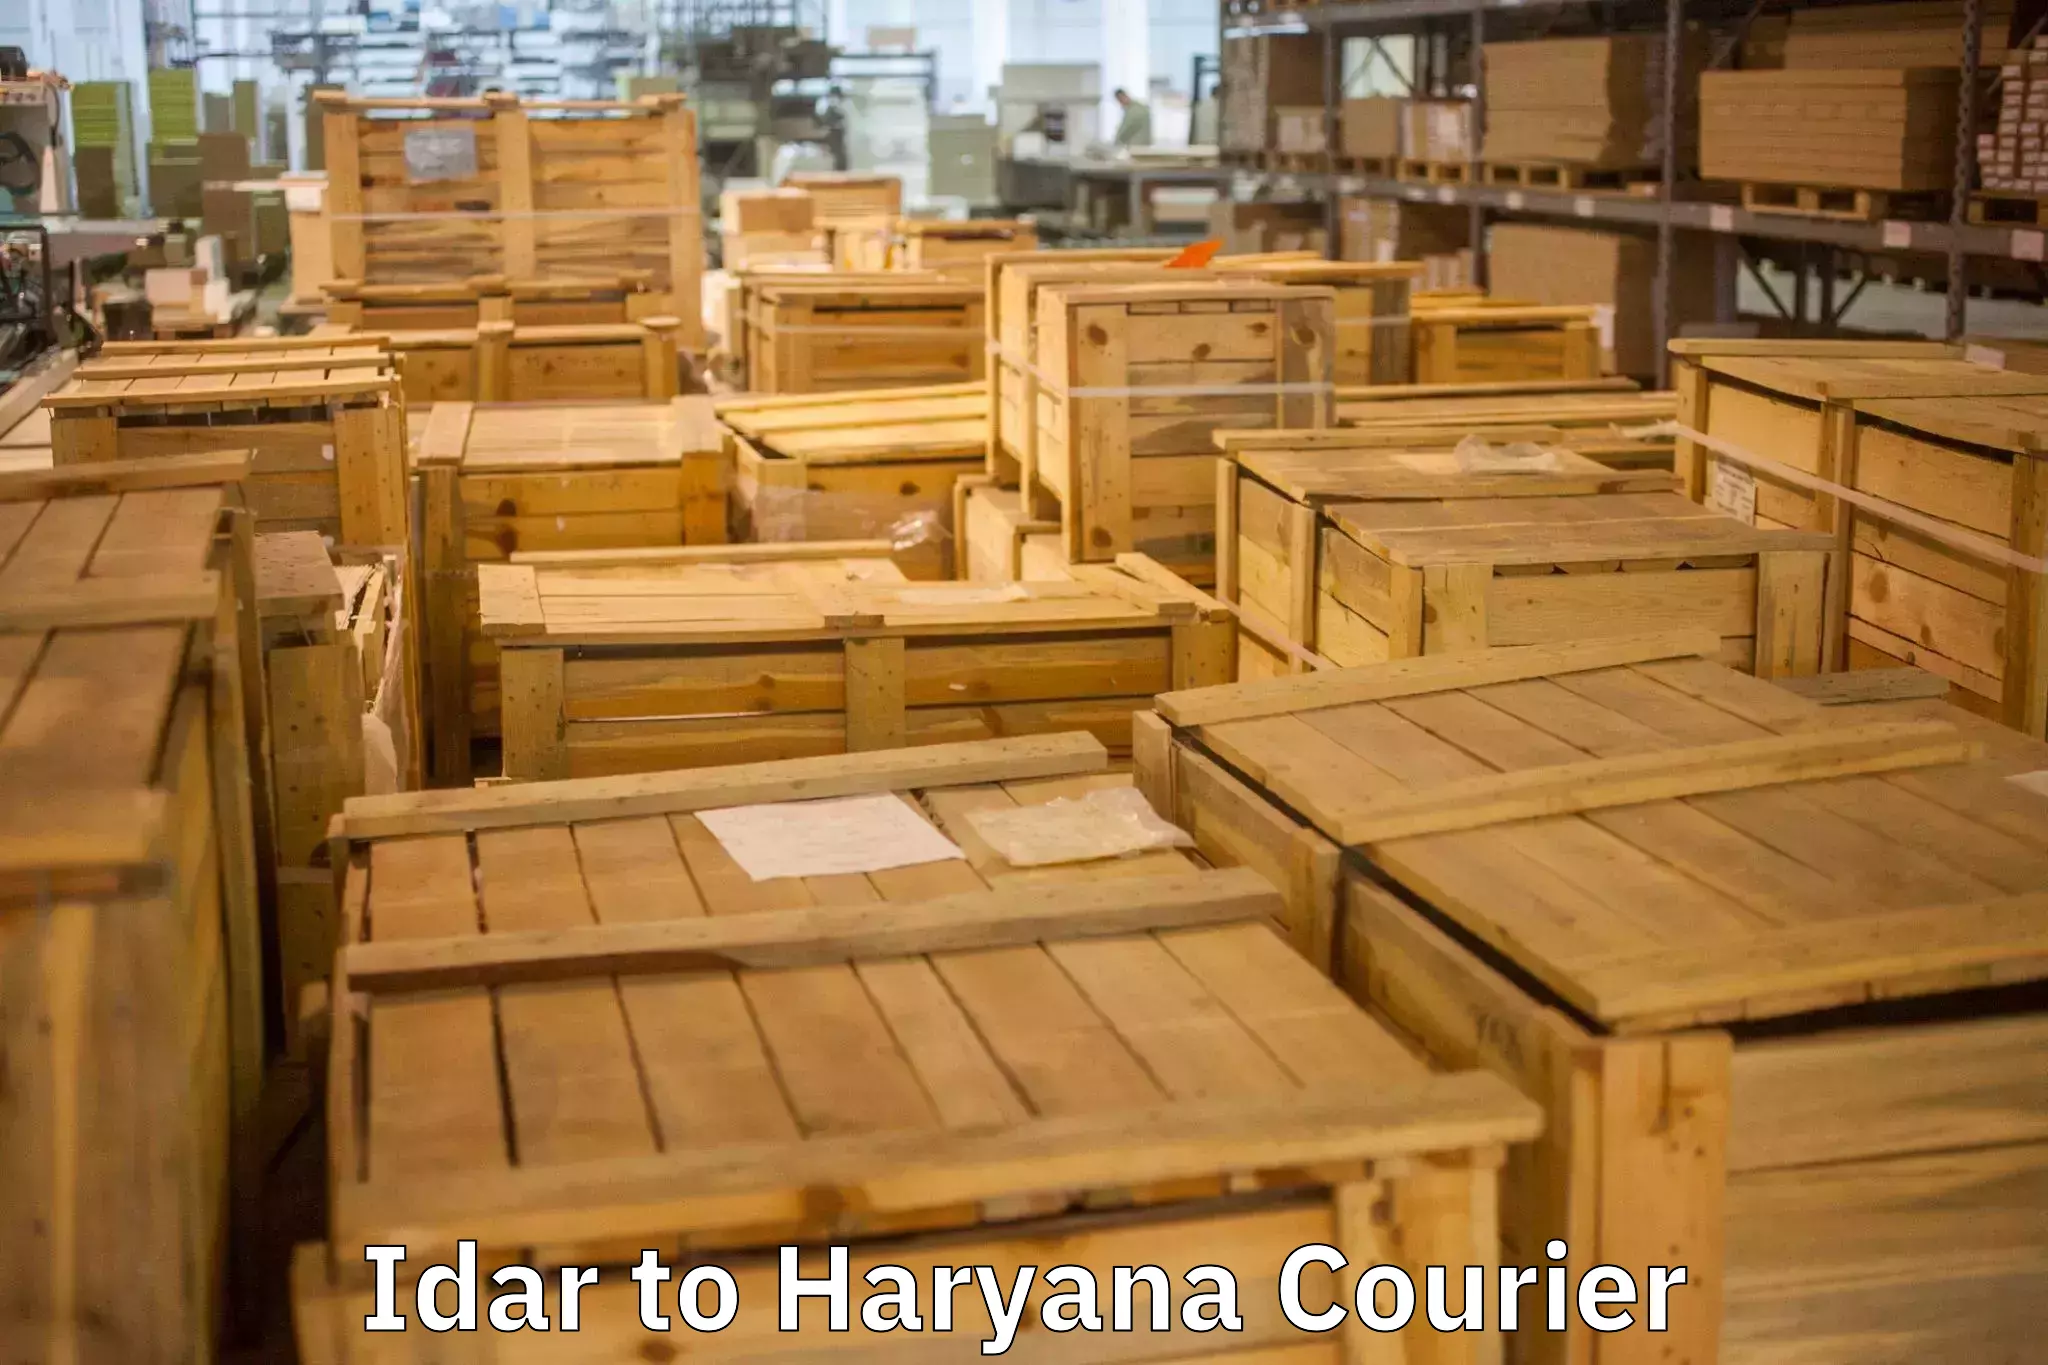 Professional moving assistance in Idar to Haryana